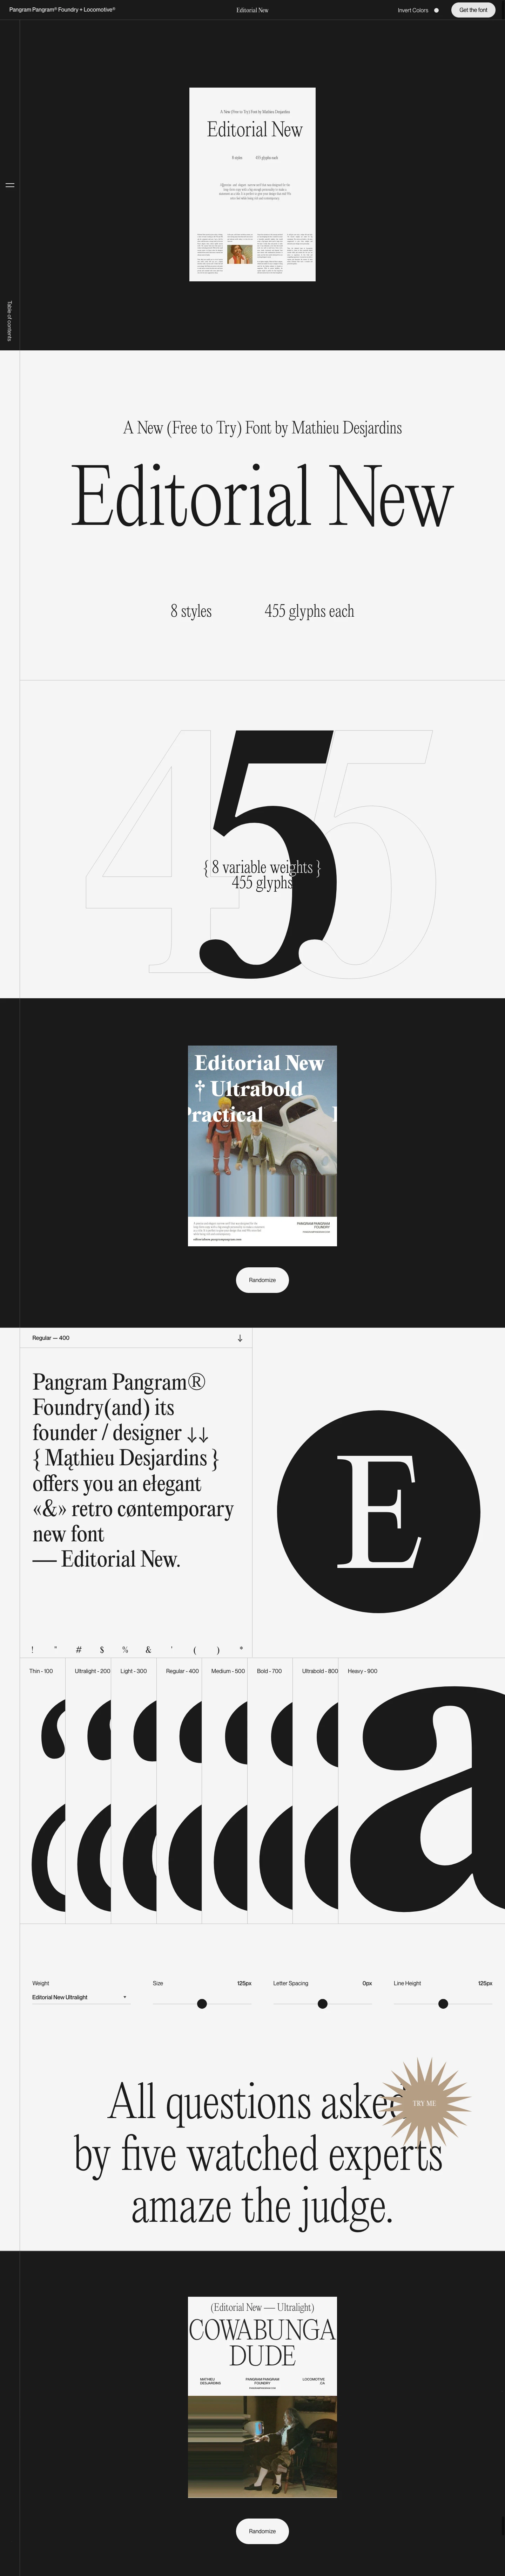 Editorial New Landing Page Example: A precise and elegant narrow serif that was designed for the long-form copy with a big enough personality to make a statement as a title. It is perfect to give your design that mid 90s retro feel while being rich and contemporary.